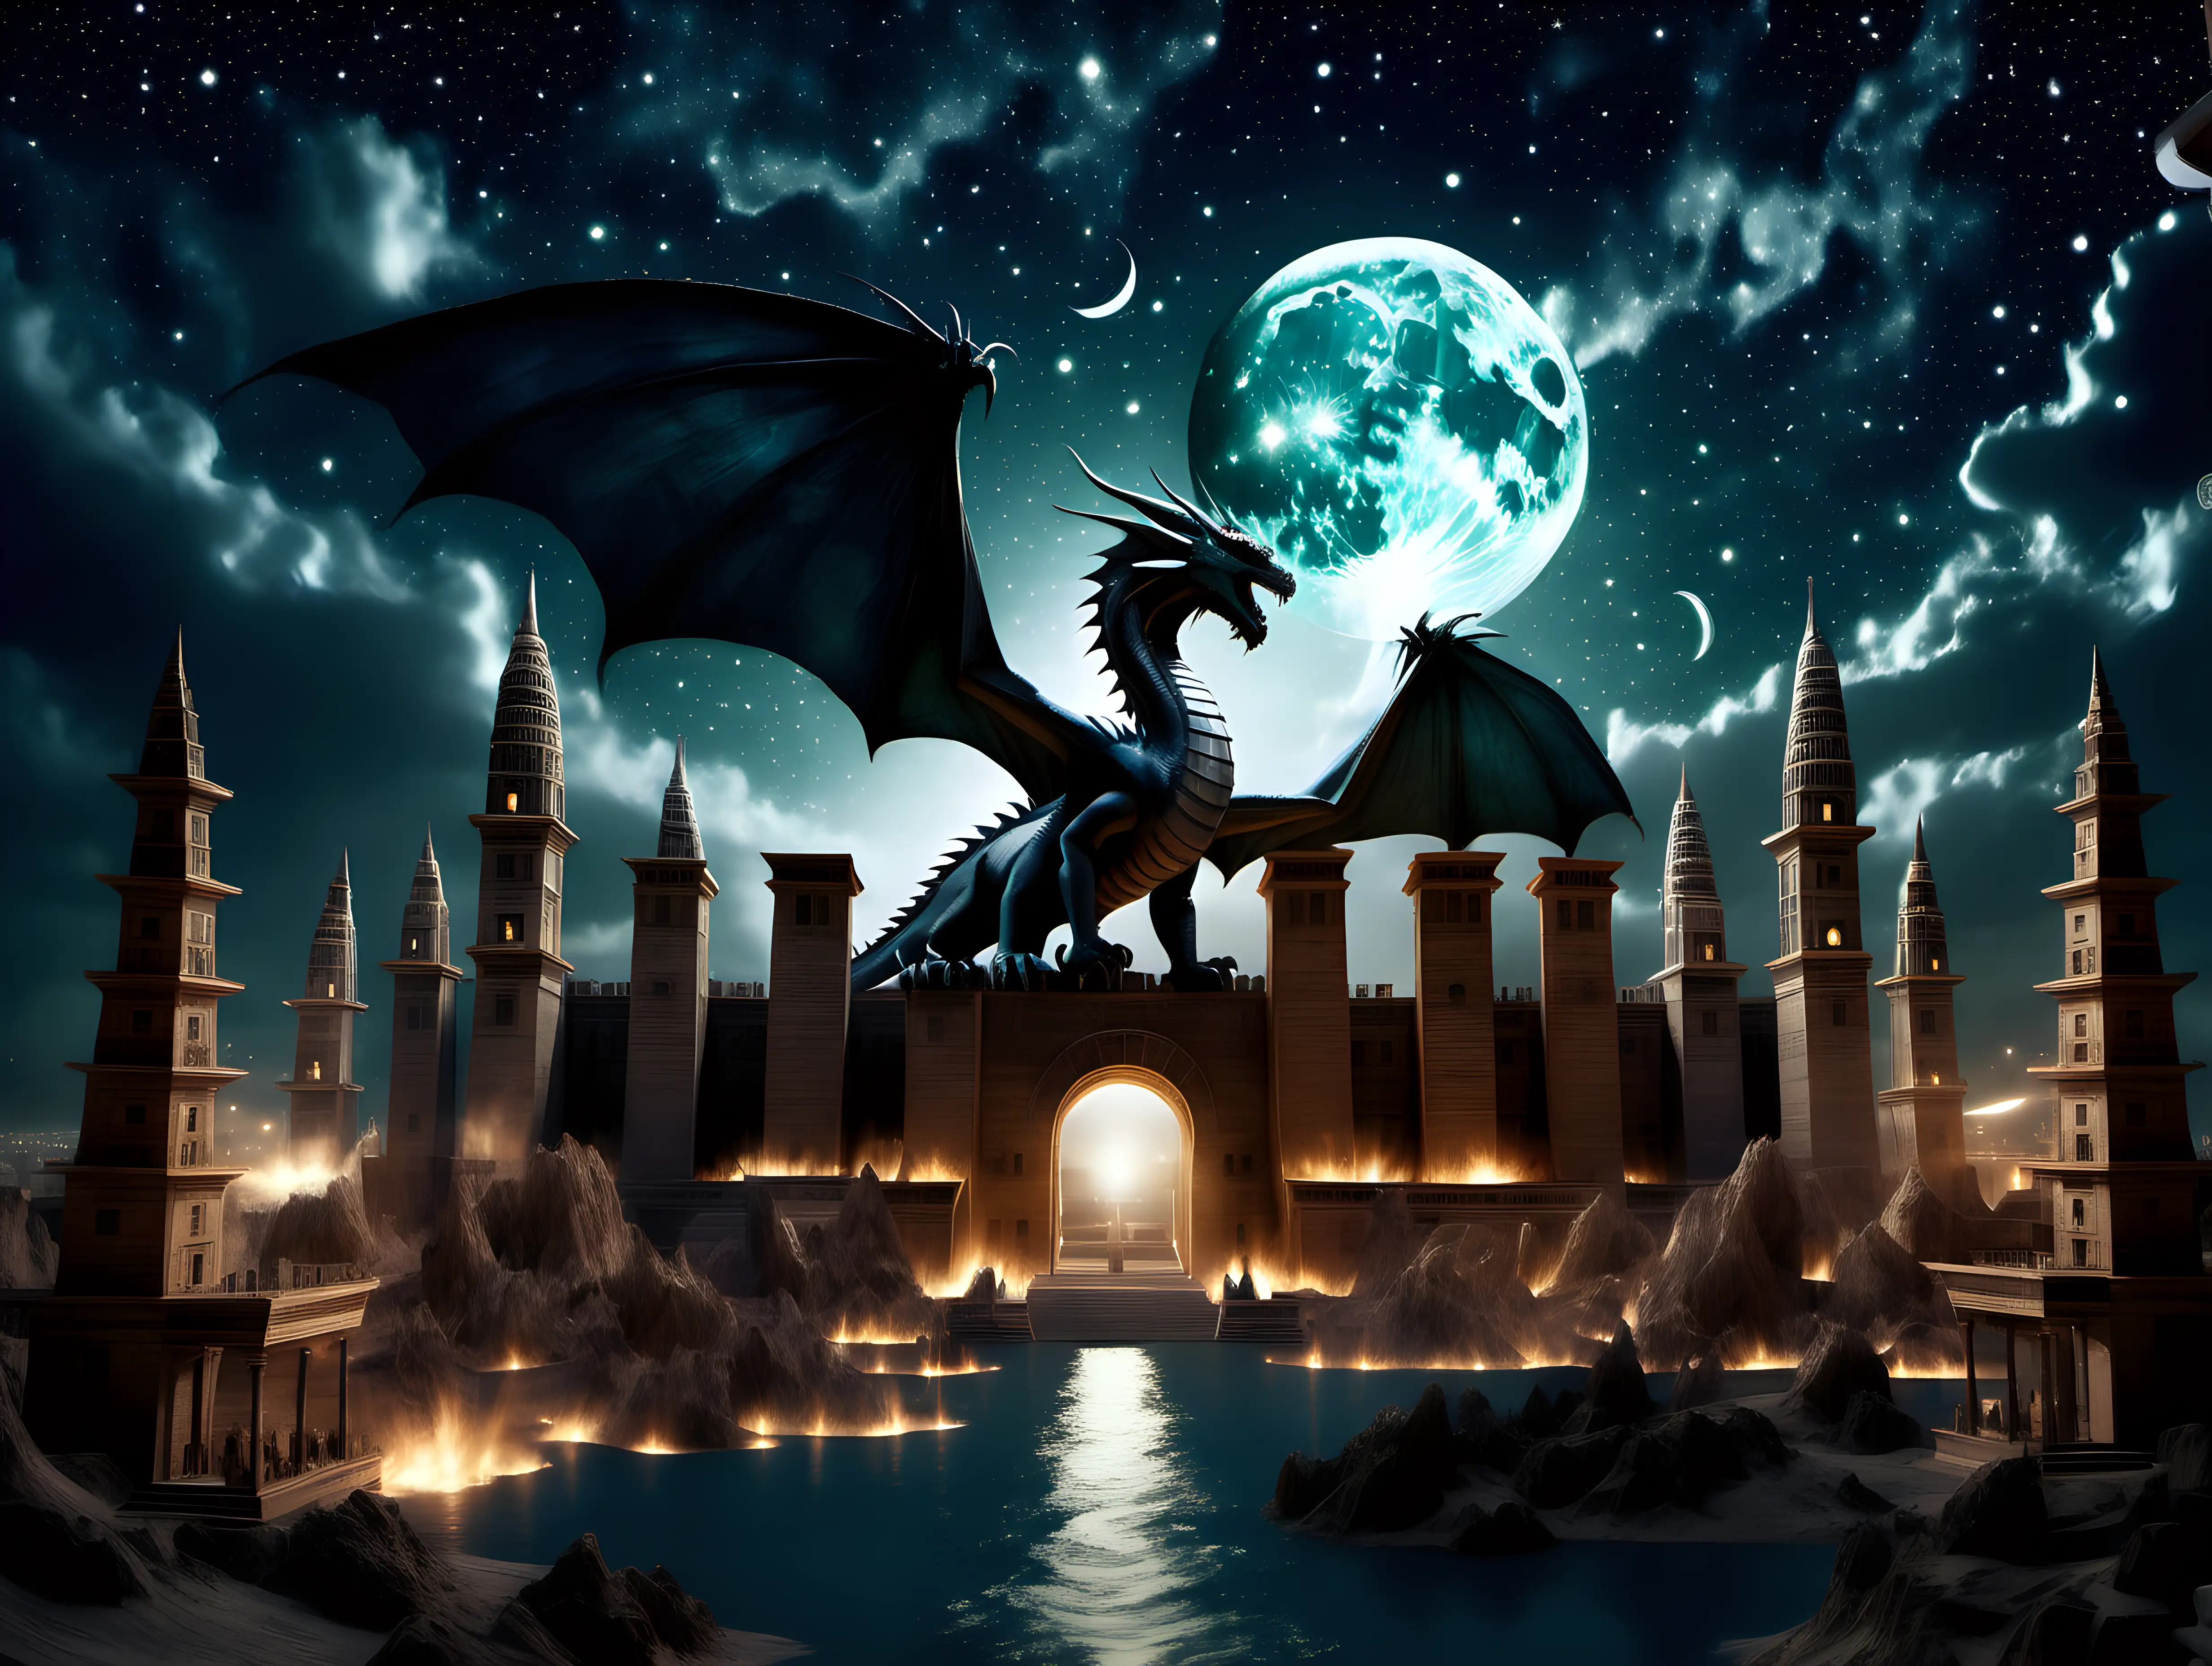 Age Of The Dragons in ancient Babylon at night with stars and moon